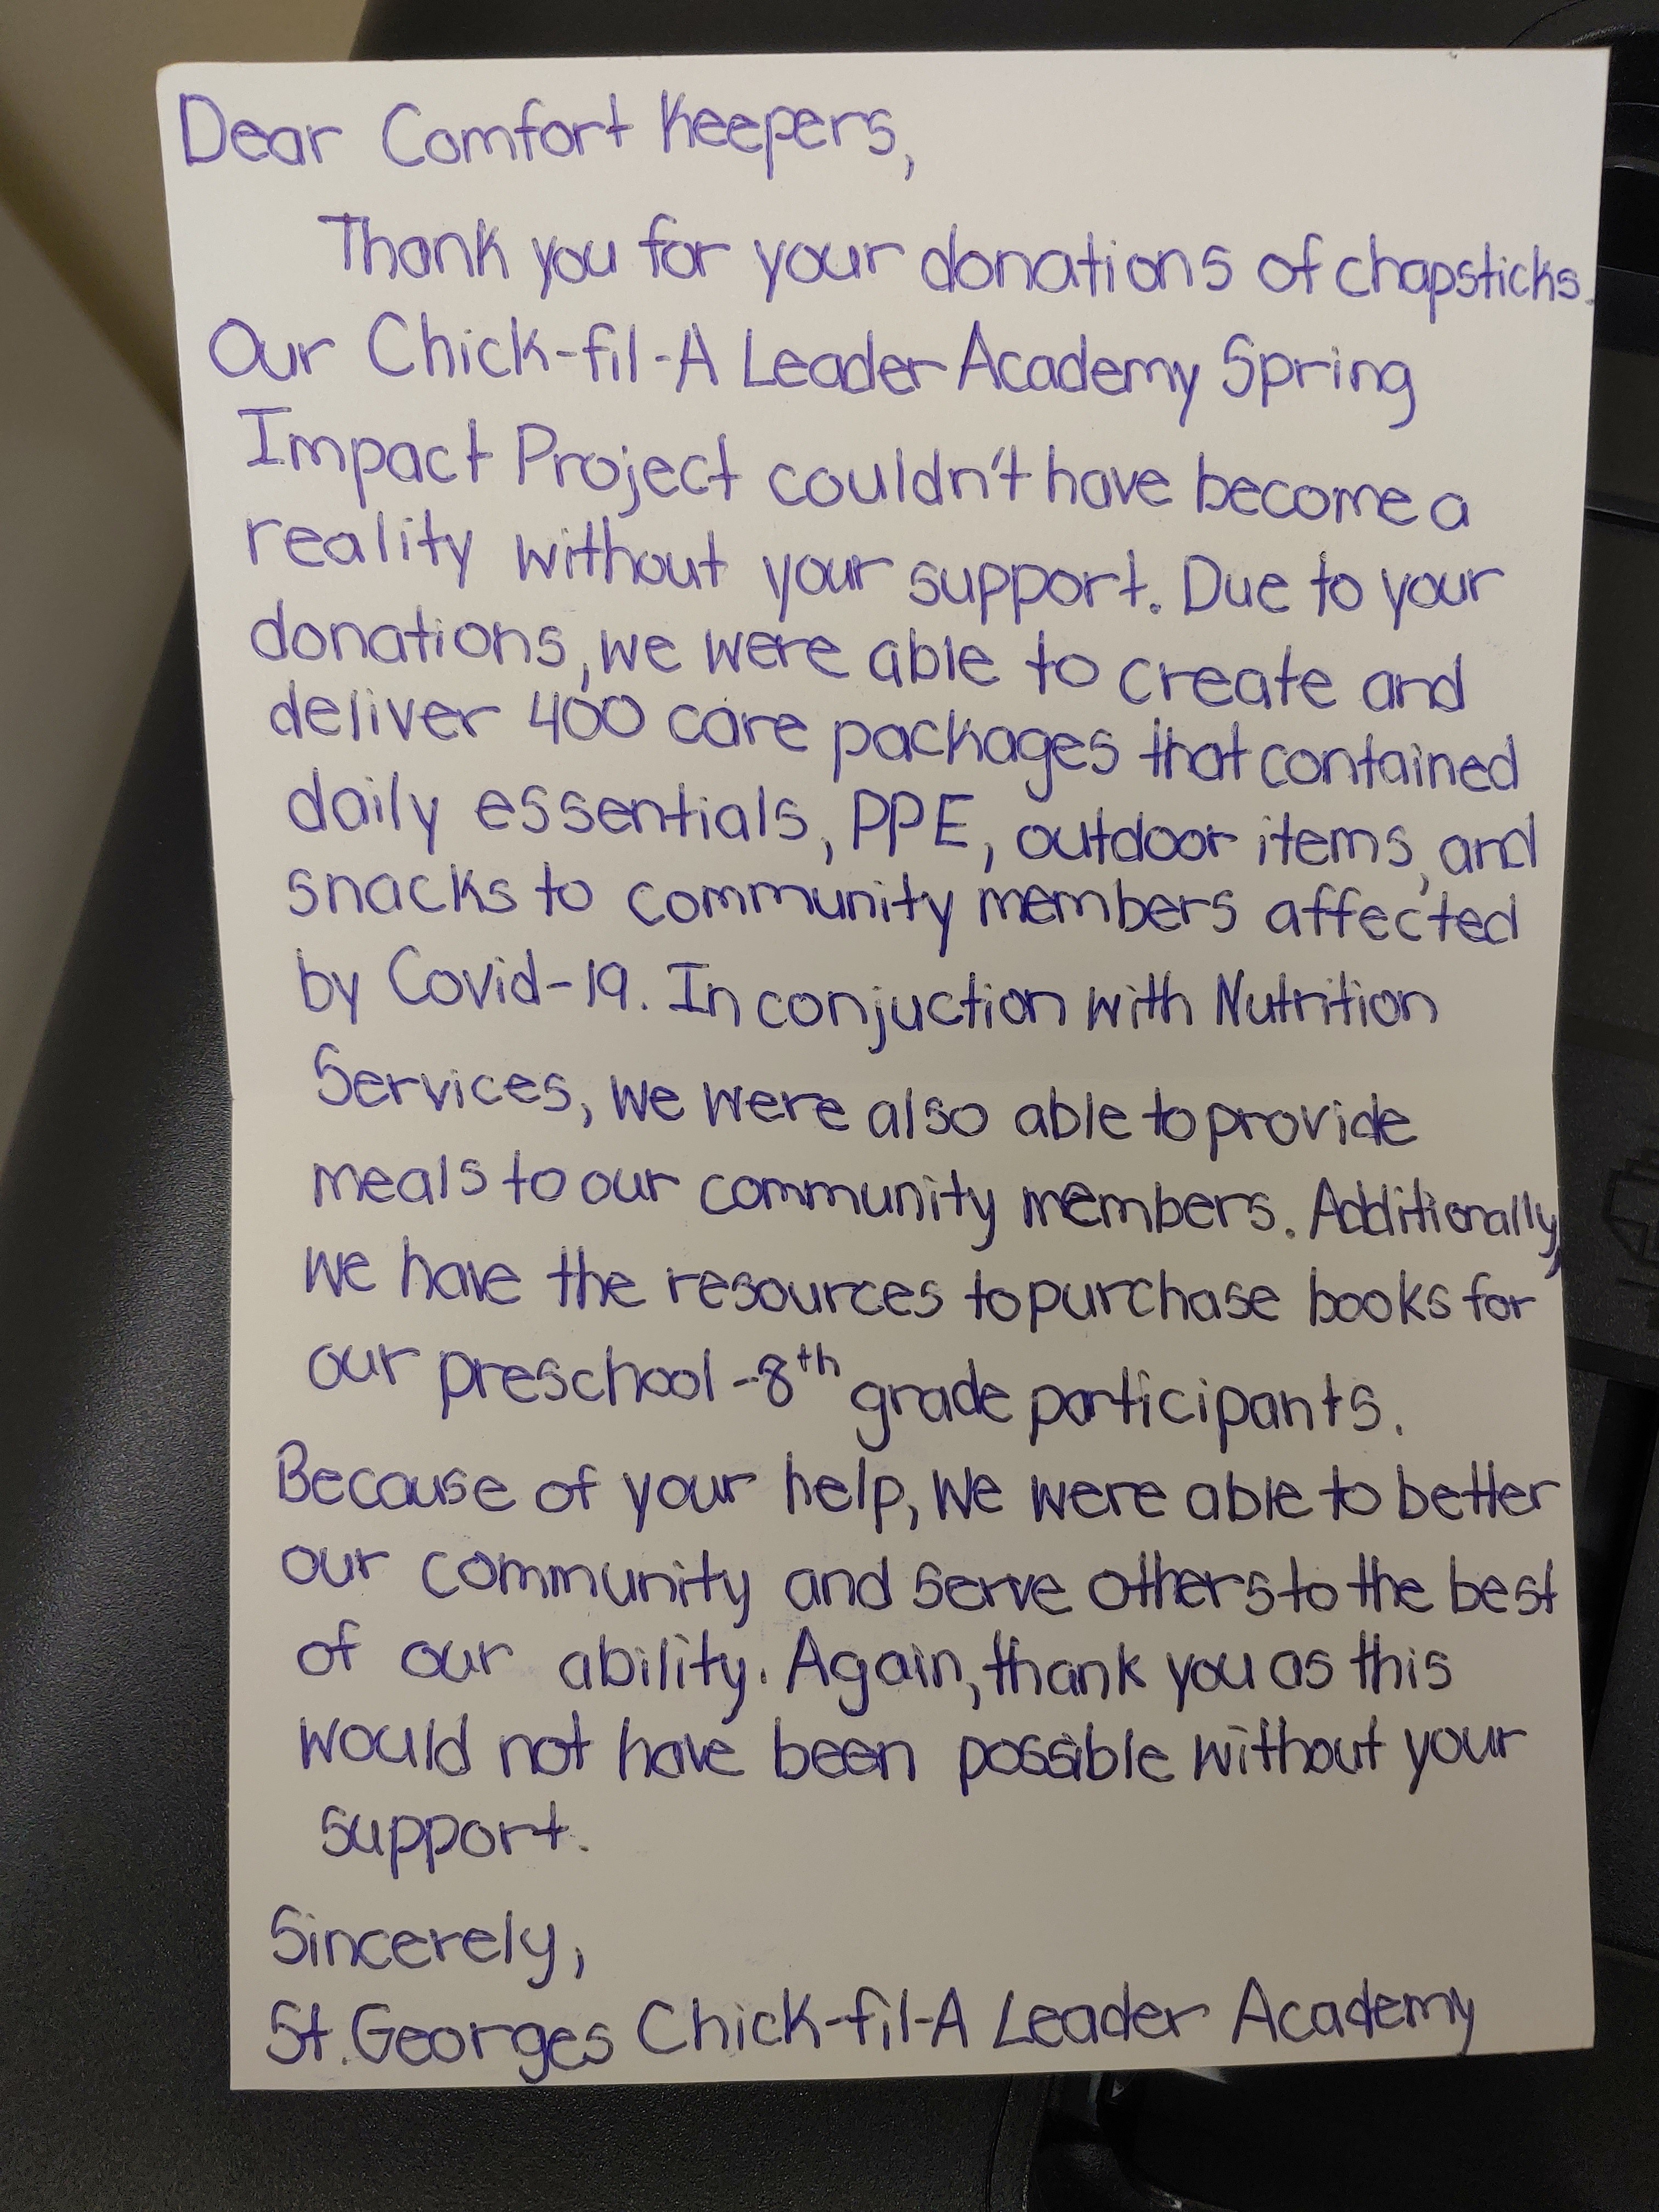 thank you letter for chick-fil-a academy spring project donations